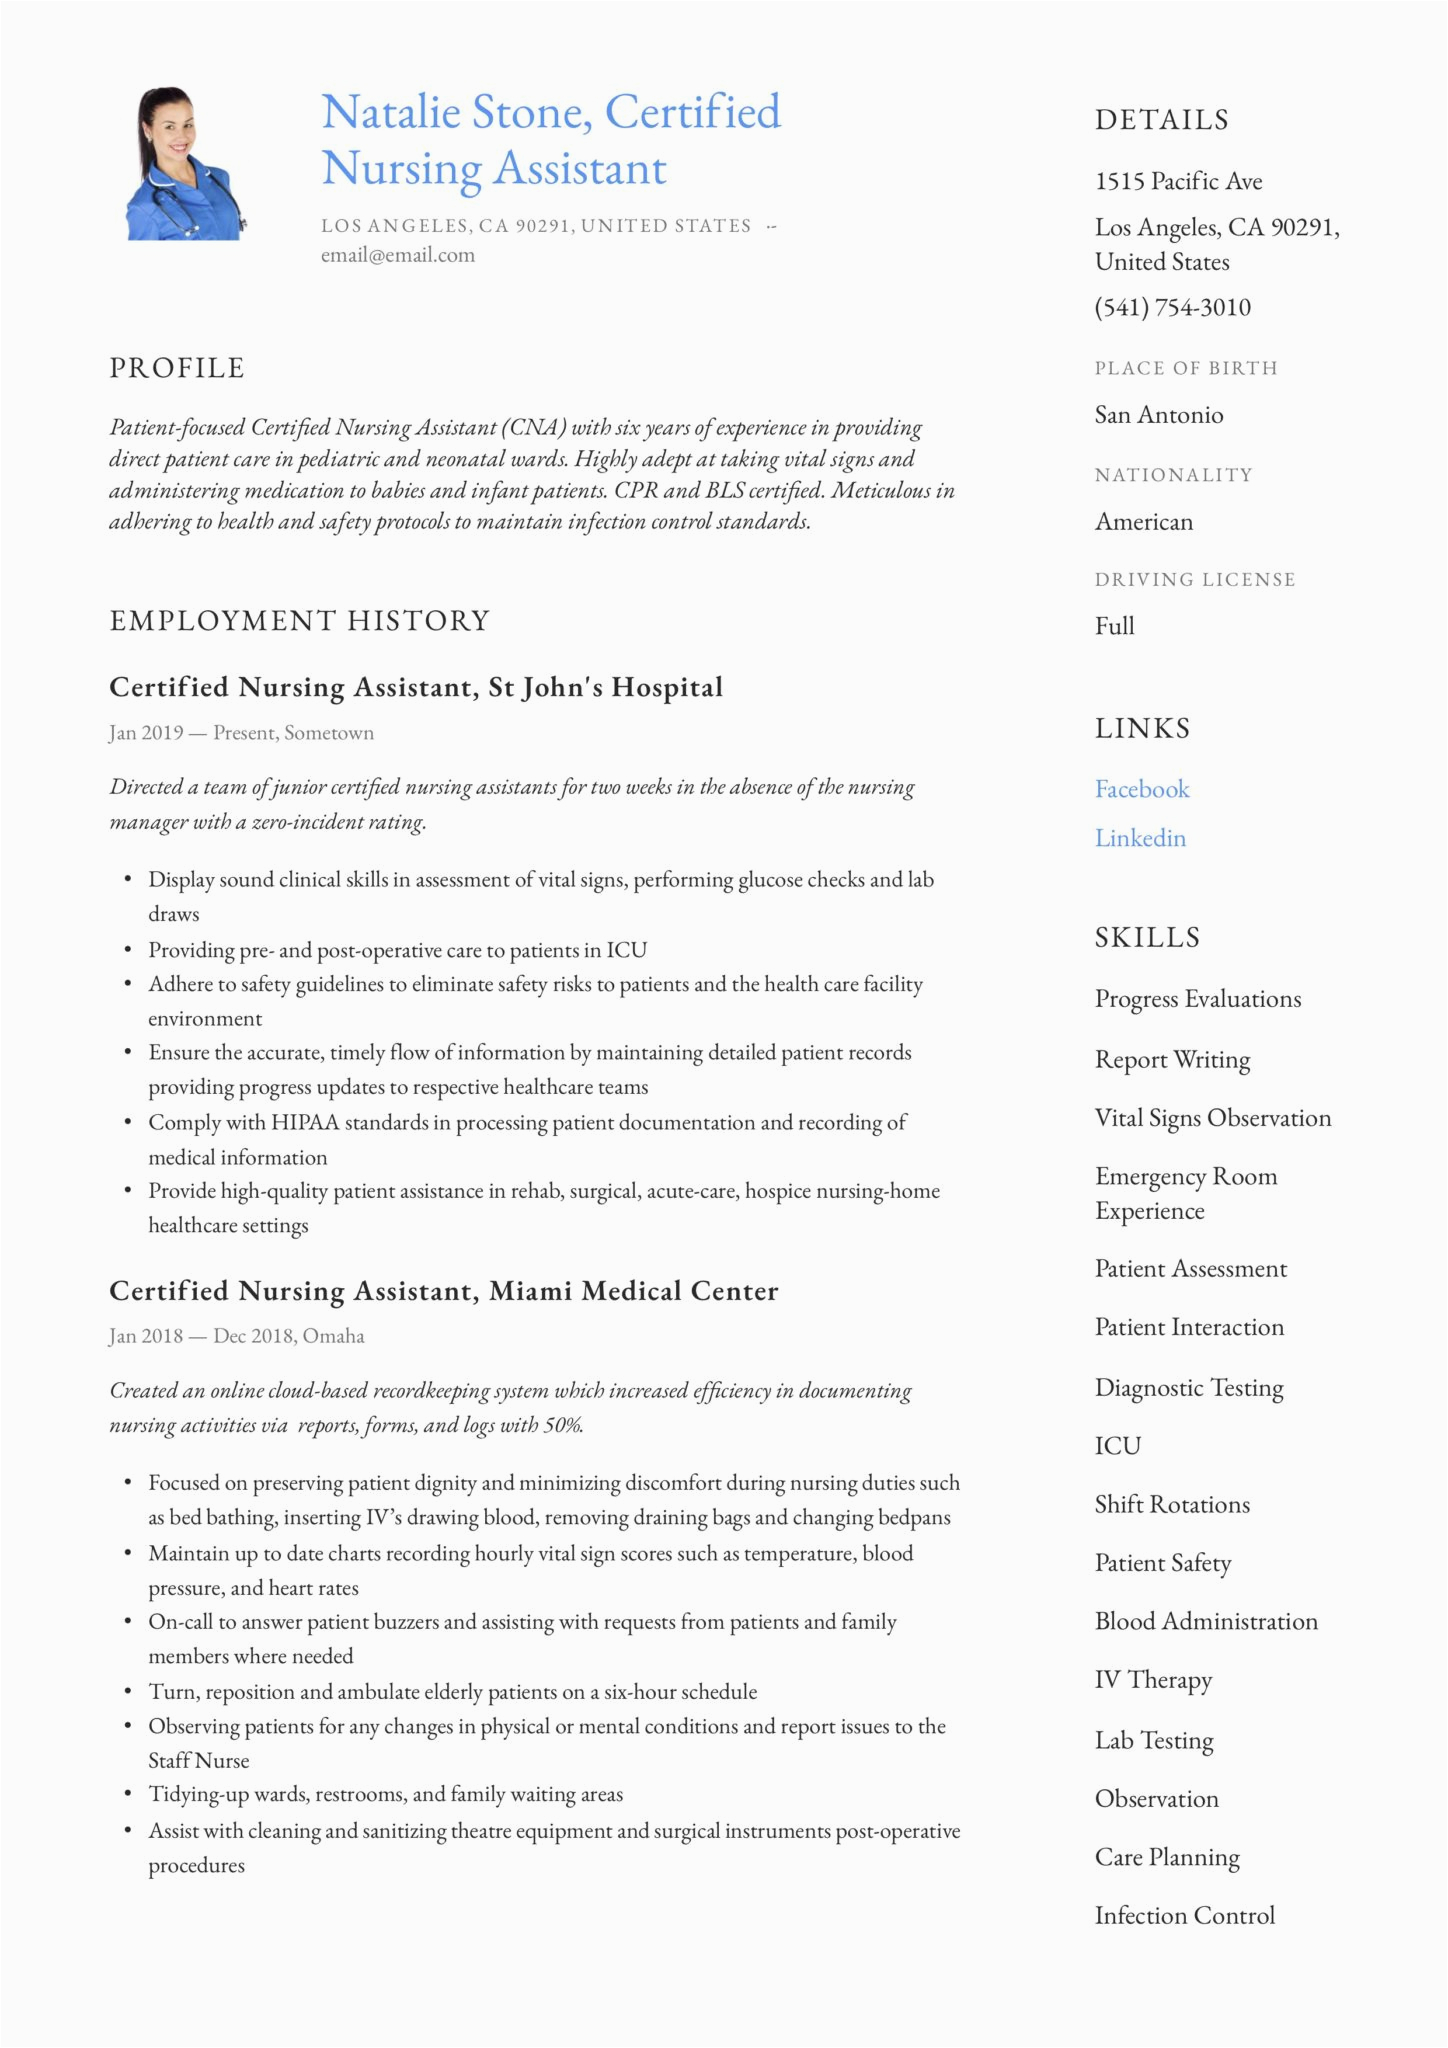 Sample for Healthcare Resume Summary Statement Certified Nursing assistant Resume & Writing Guide 12 Templates